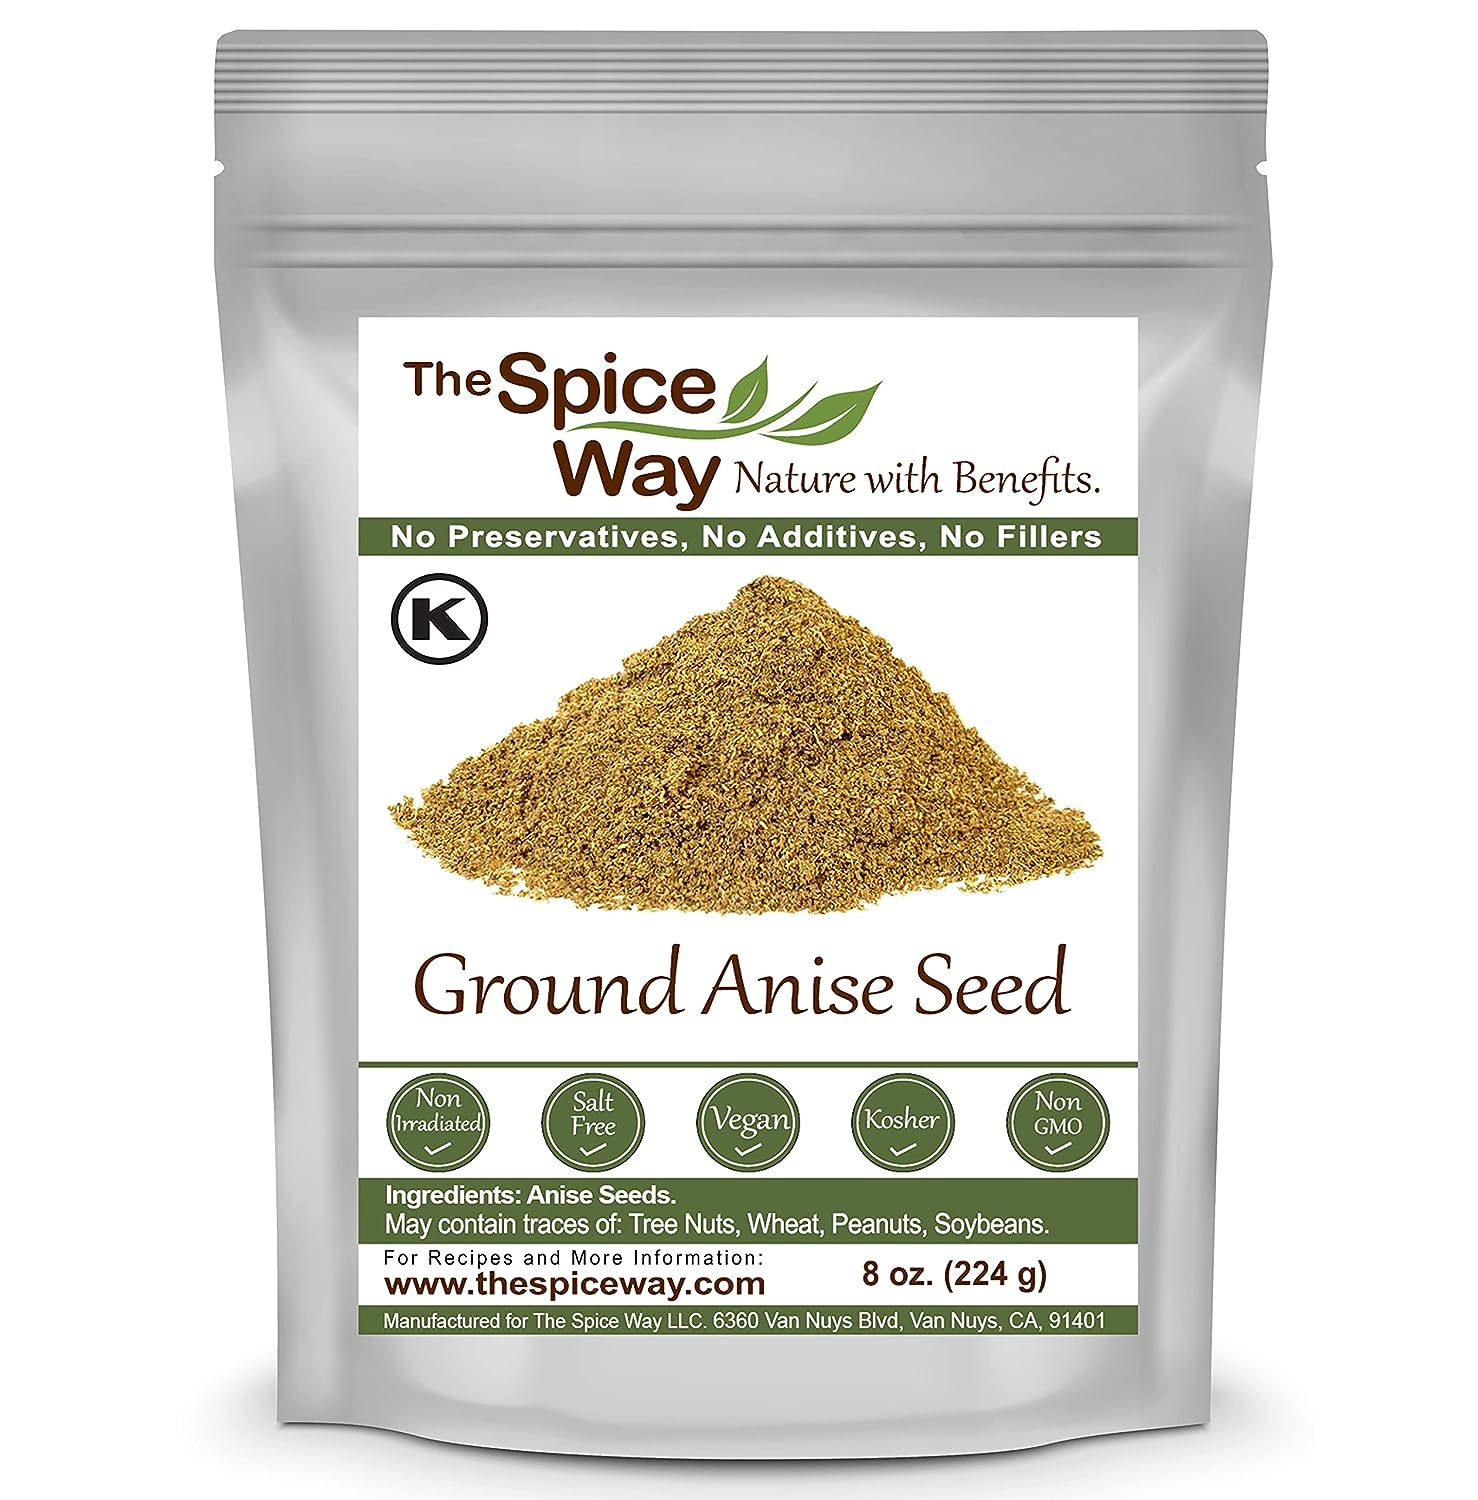 The Spice Way Premium Anise Seeds - Ground seeds